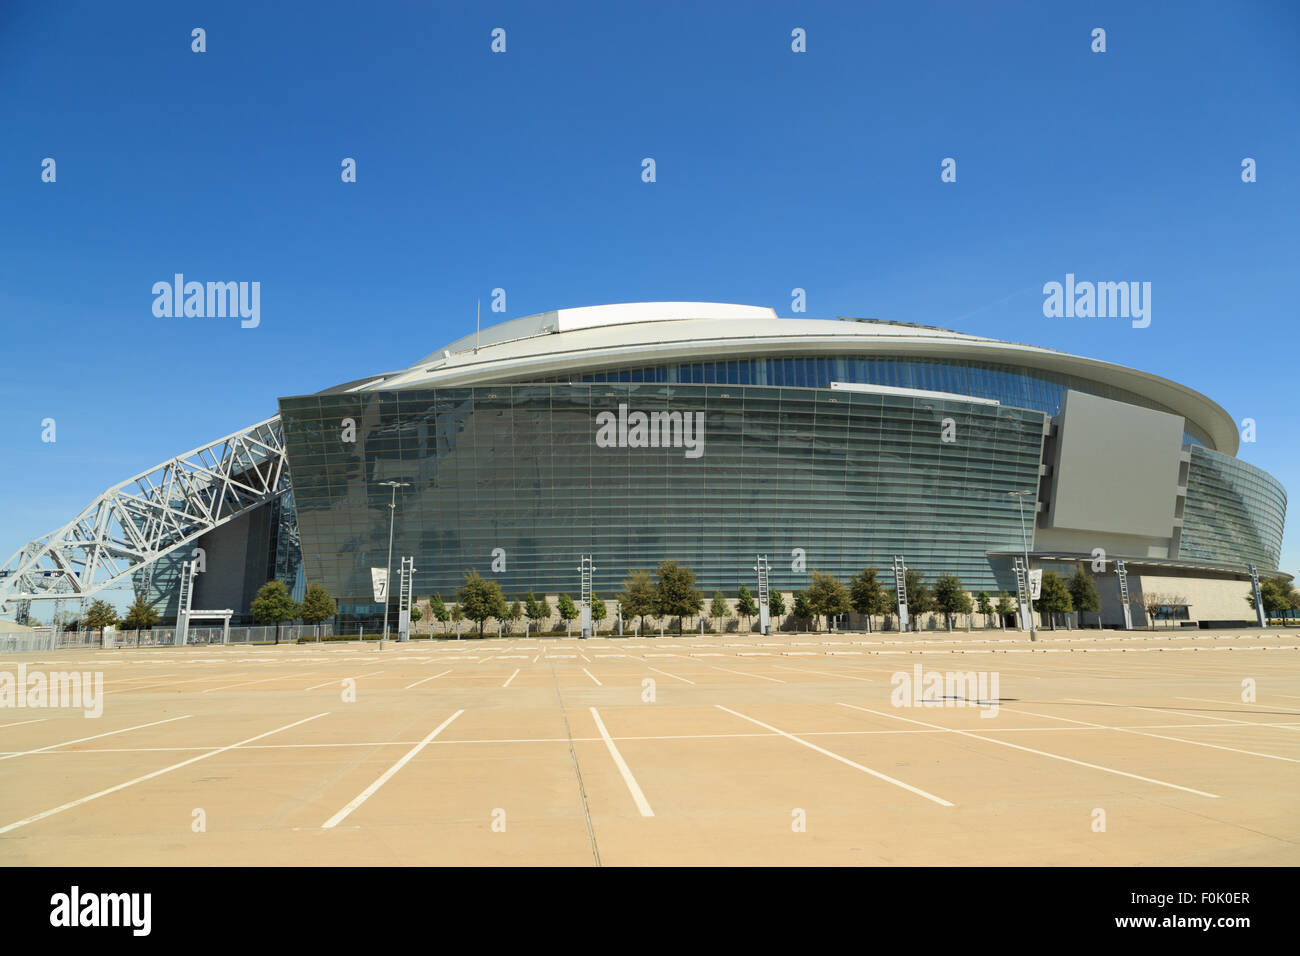 A photograph of AT&T Stadium, formerly known as Cowboys Stadium, in Arlington, Texas, United States. Stock Photo